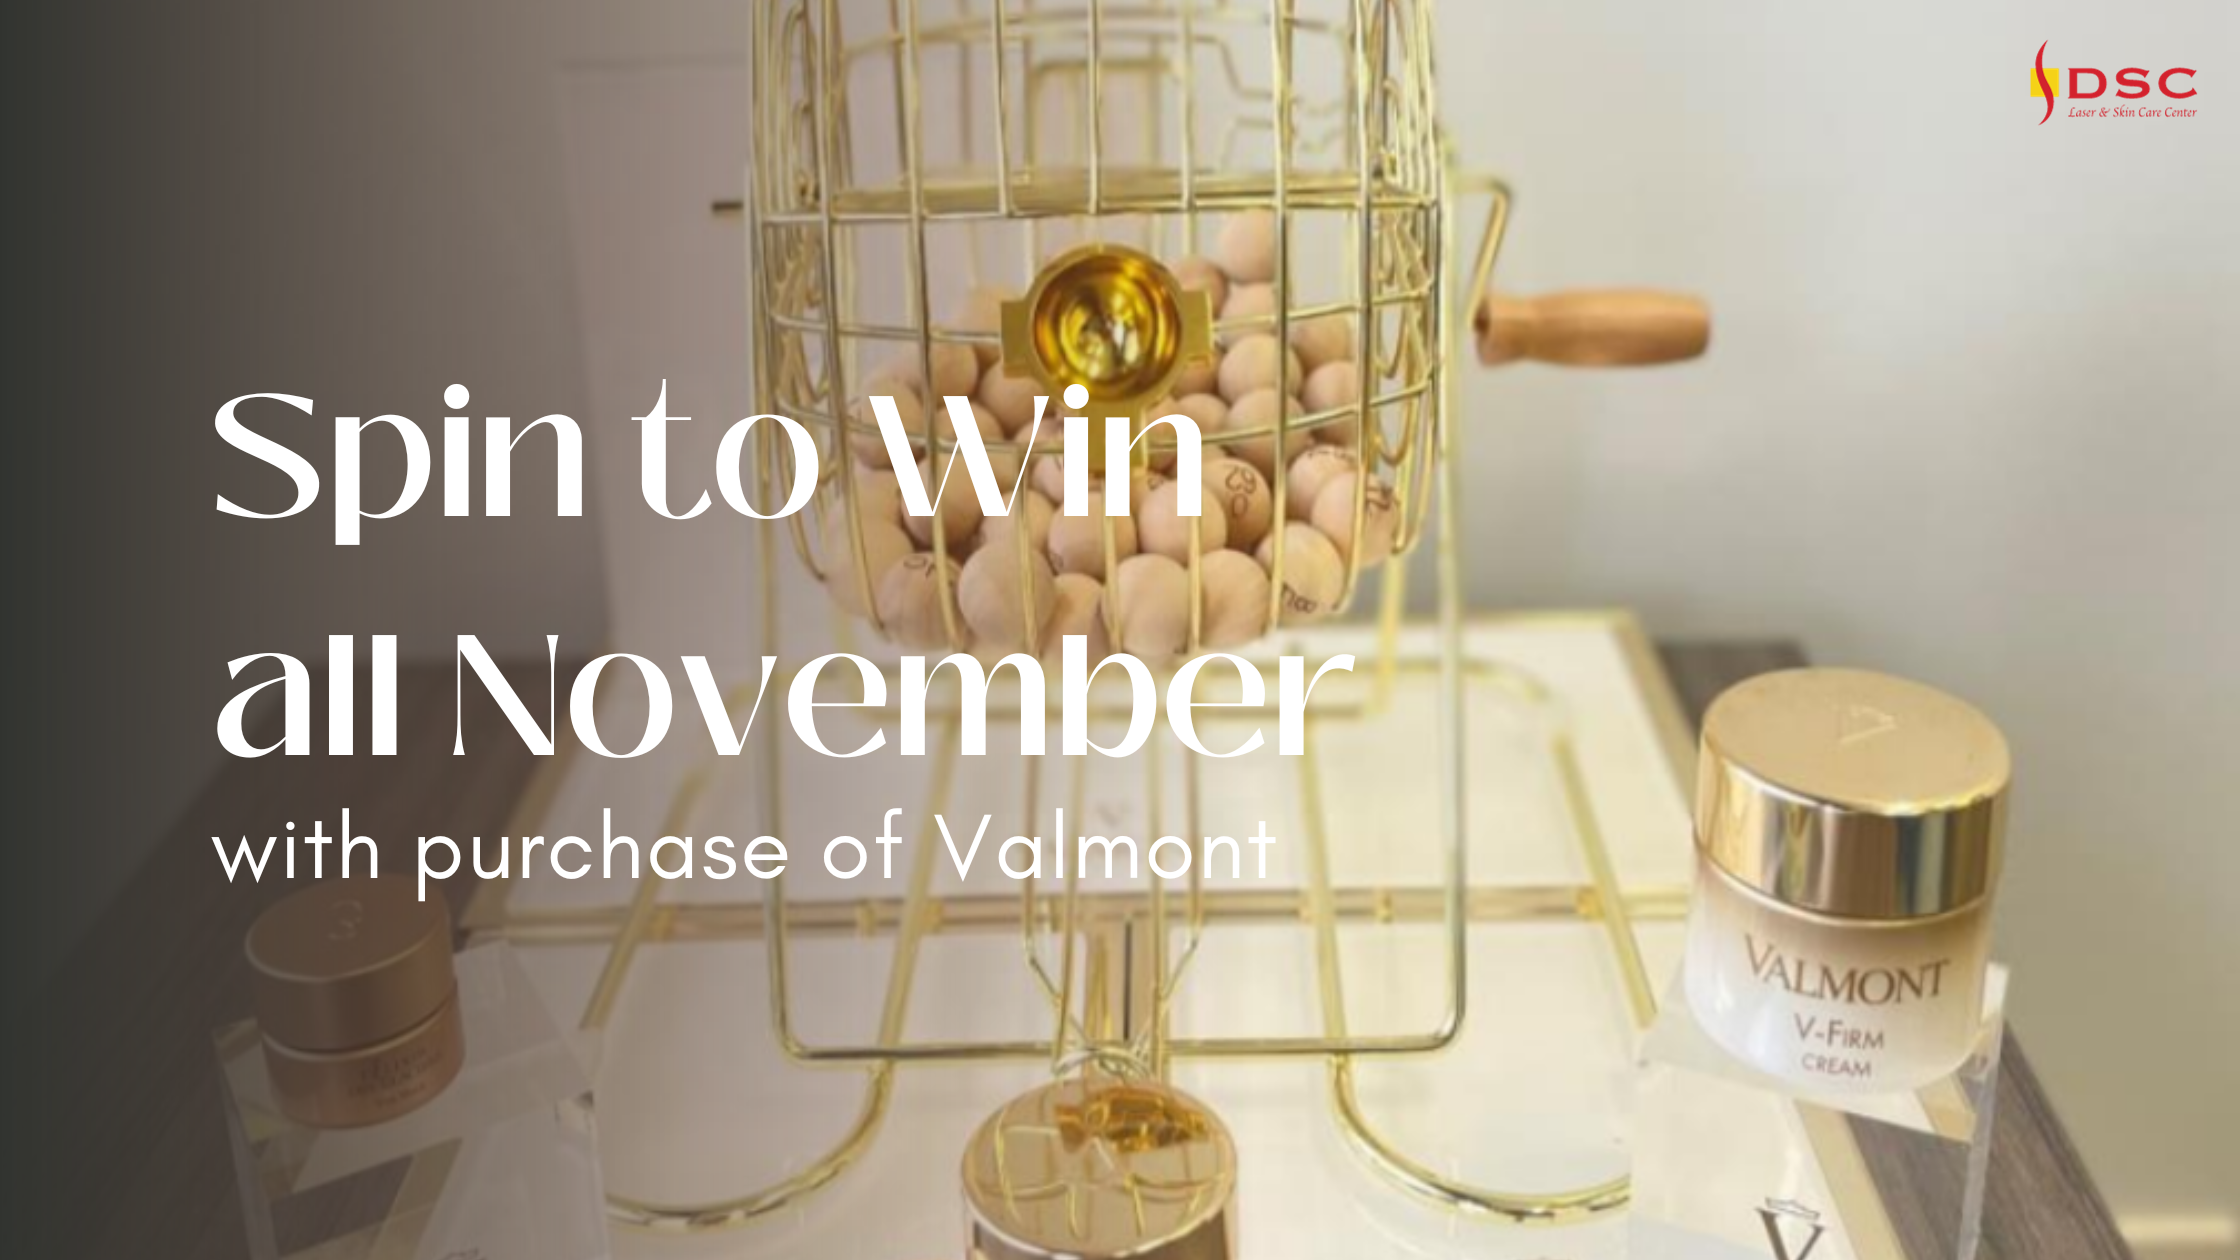 DSC Valmont Spin to Win Blog Banner with Spin to Win Machine image as background and the text "Spin to Win All November" over the text "with purchase of Valmont"